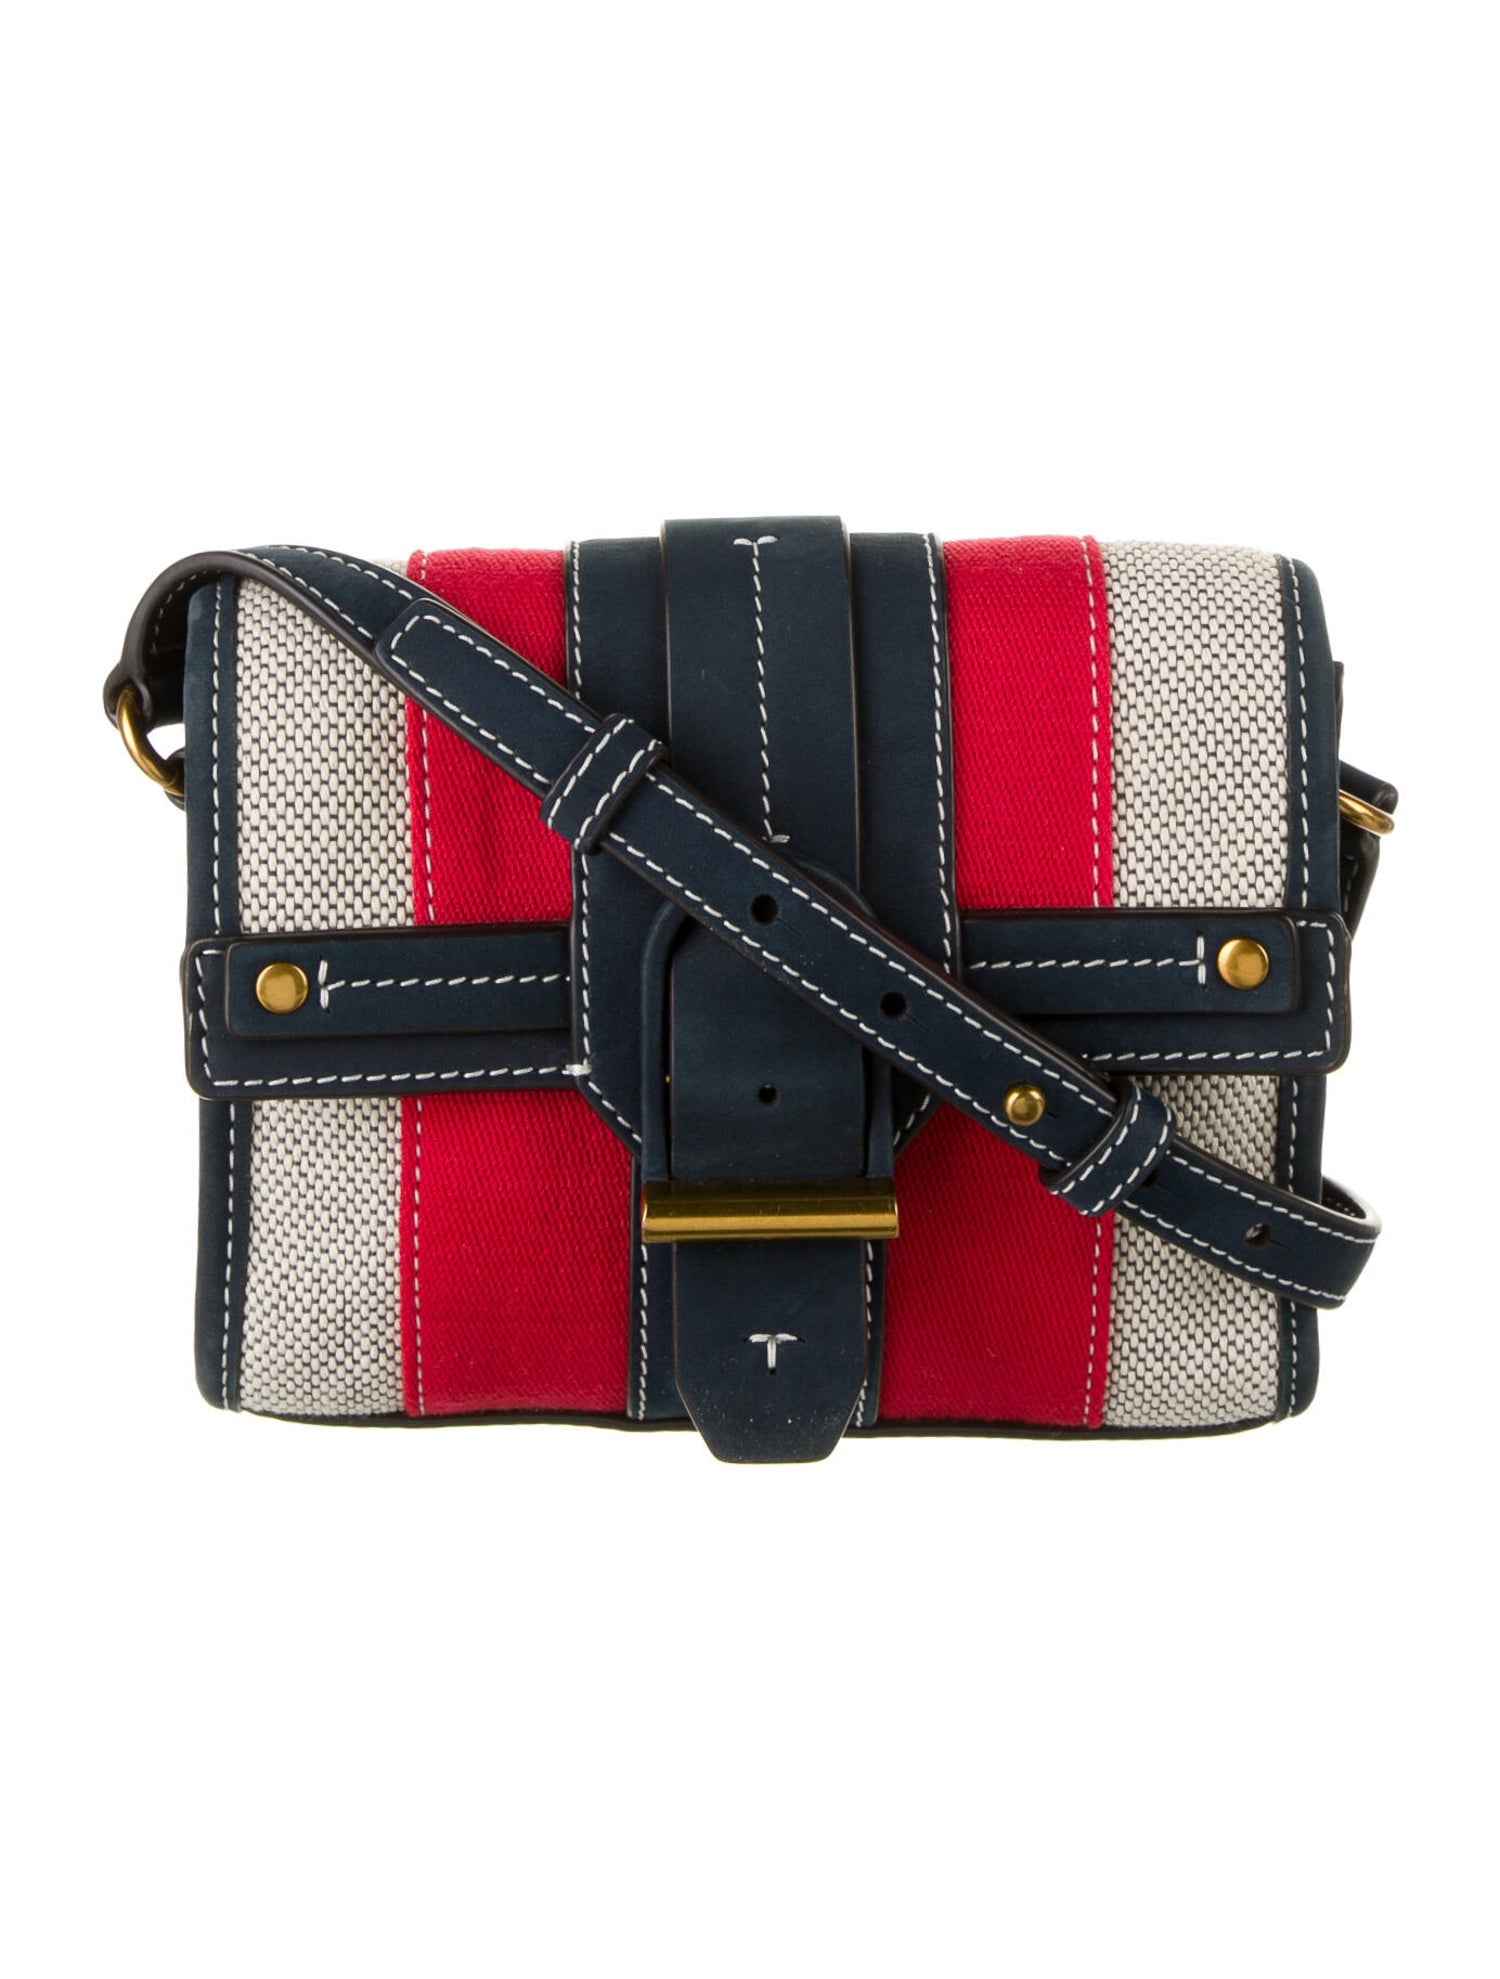 Tory Burch Canvas and Suede Crossbody Bag – Simply Audrey